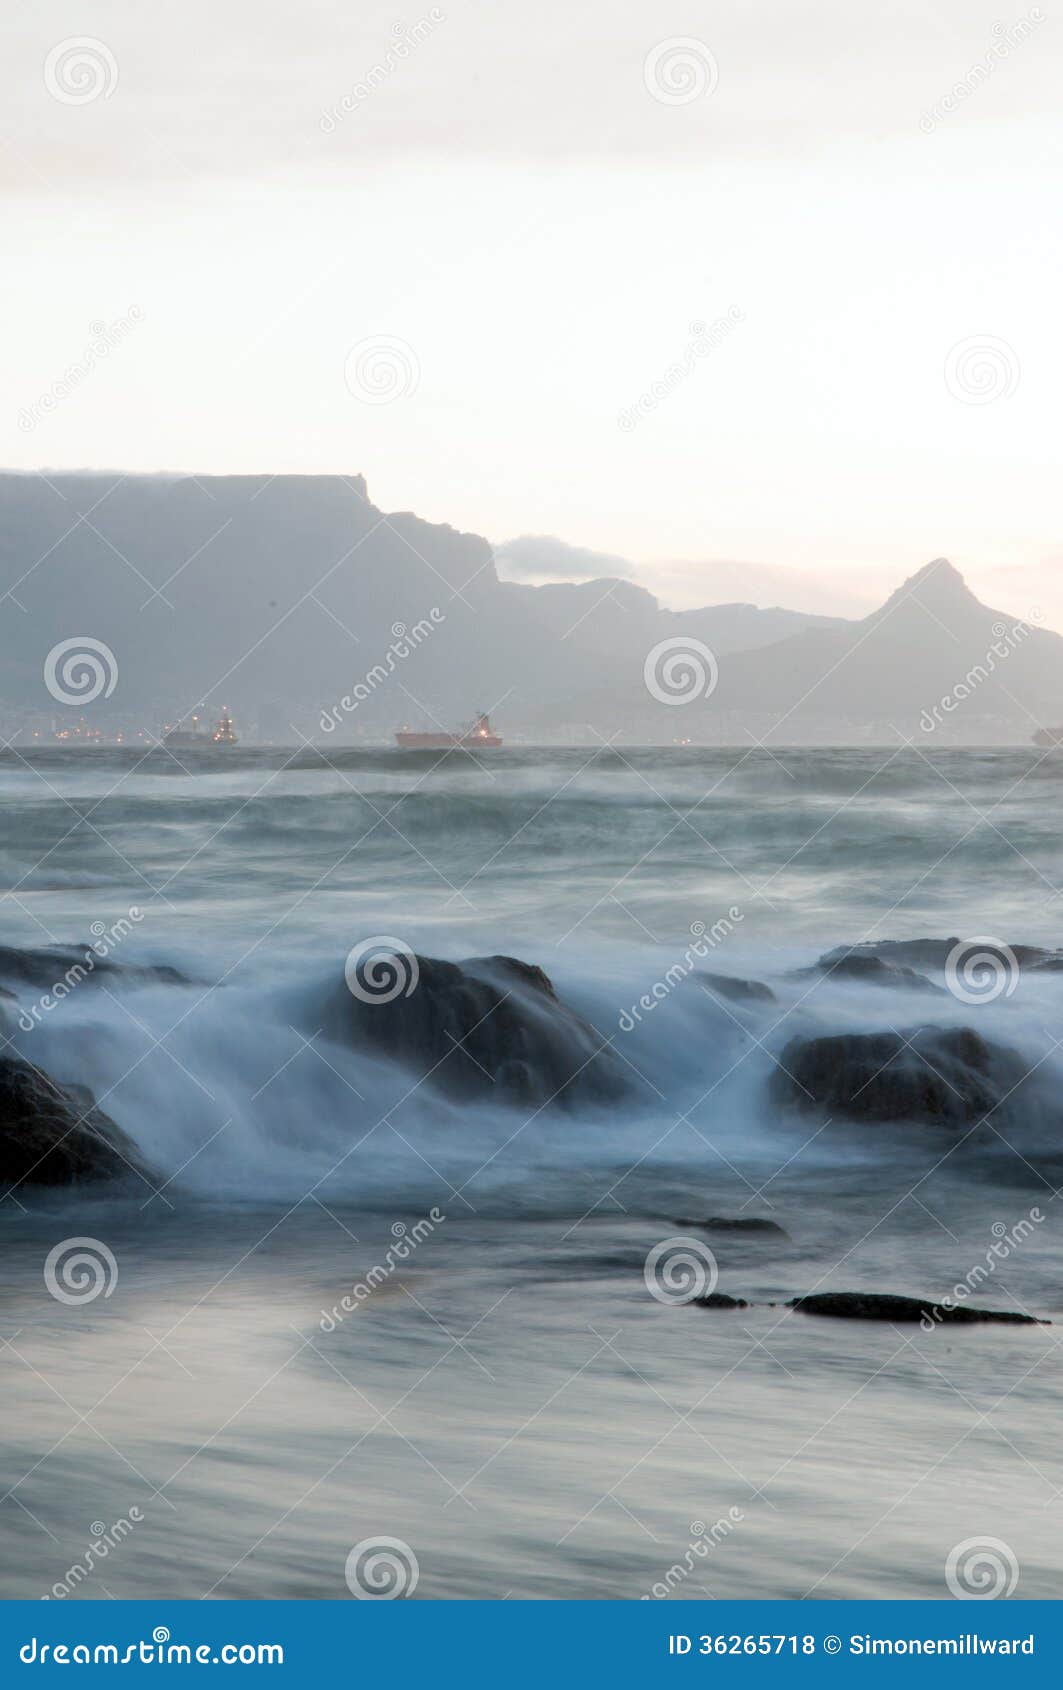 Water on rocks stock photo. Image of eighth, nobody, landscape - 36265718